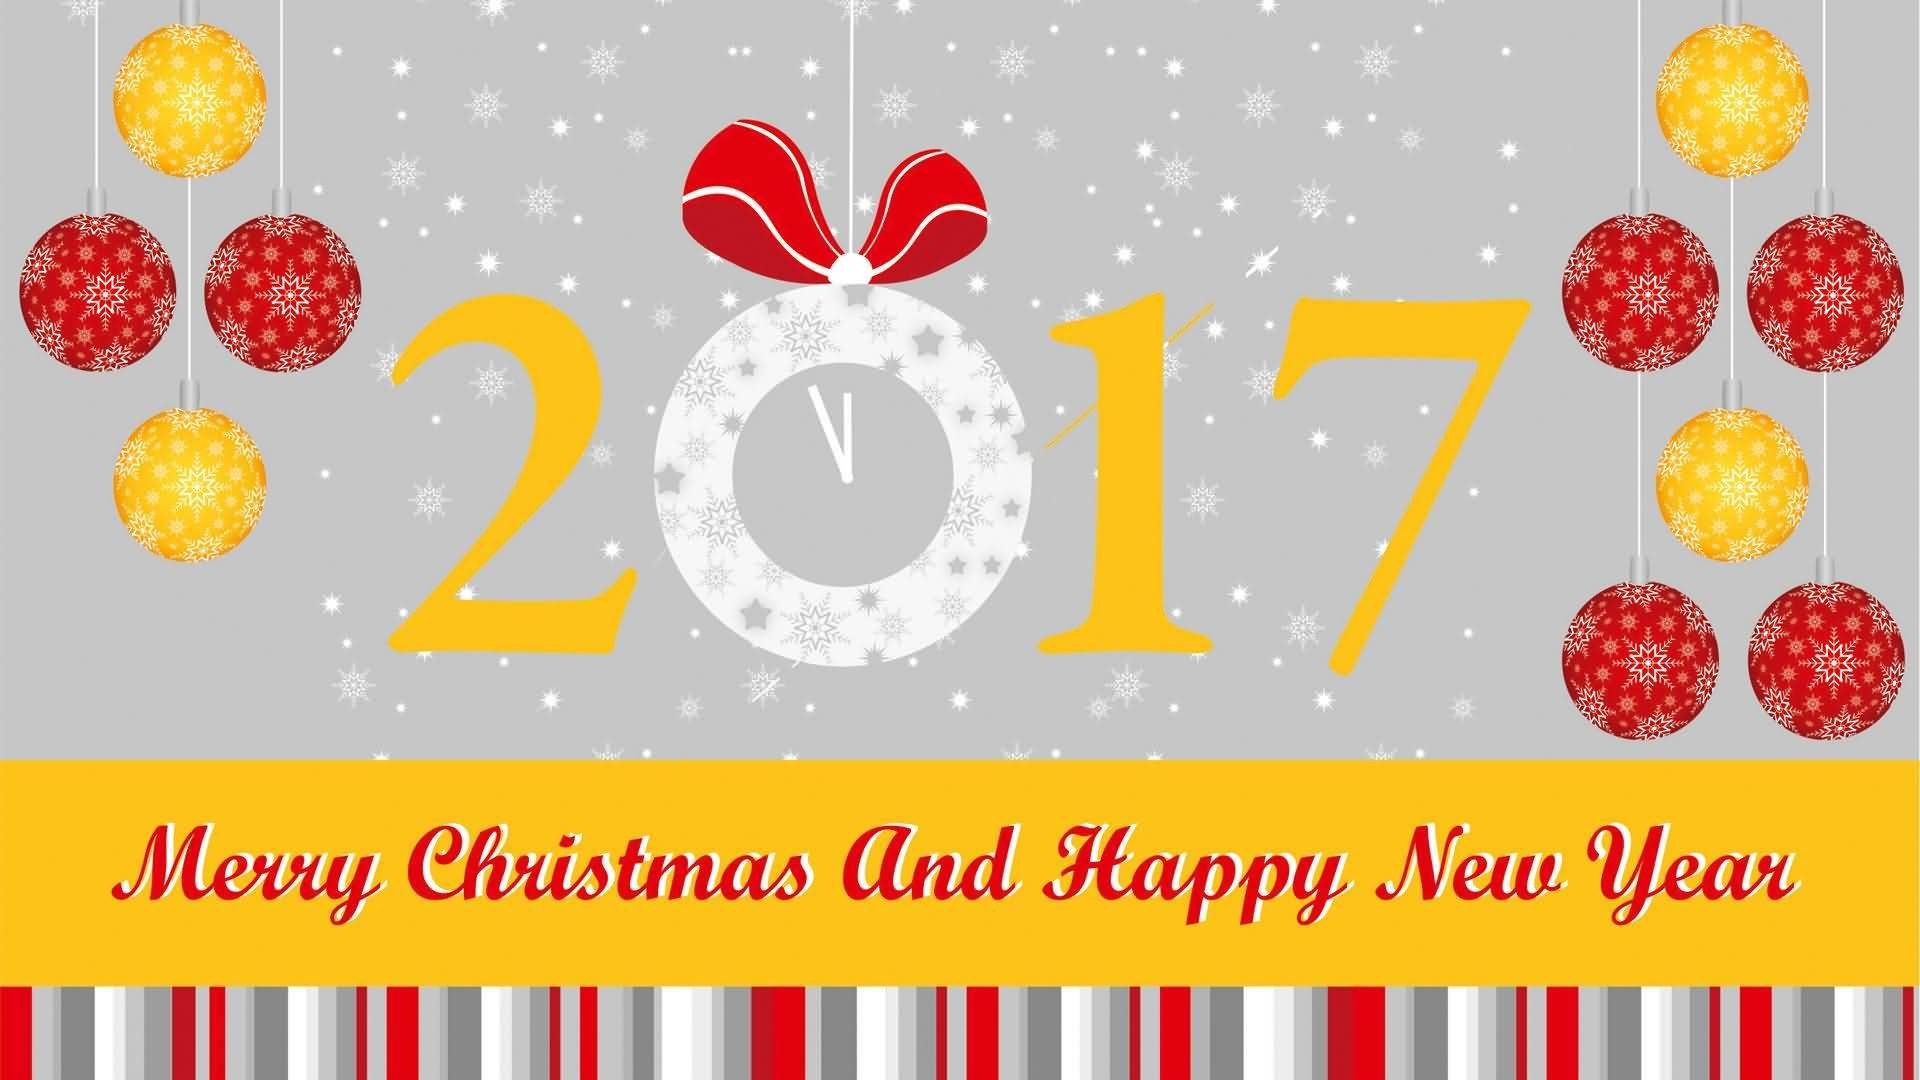 Merry Christmas And Happy New Year 2017